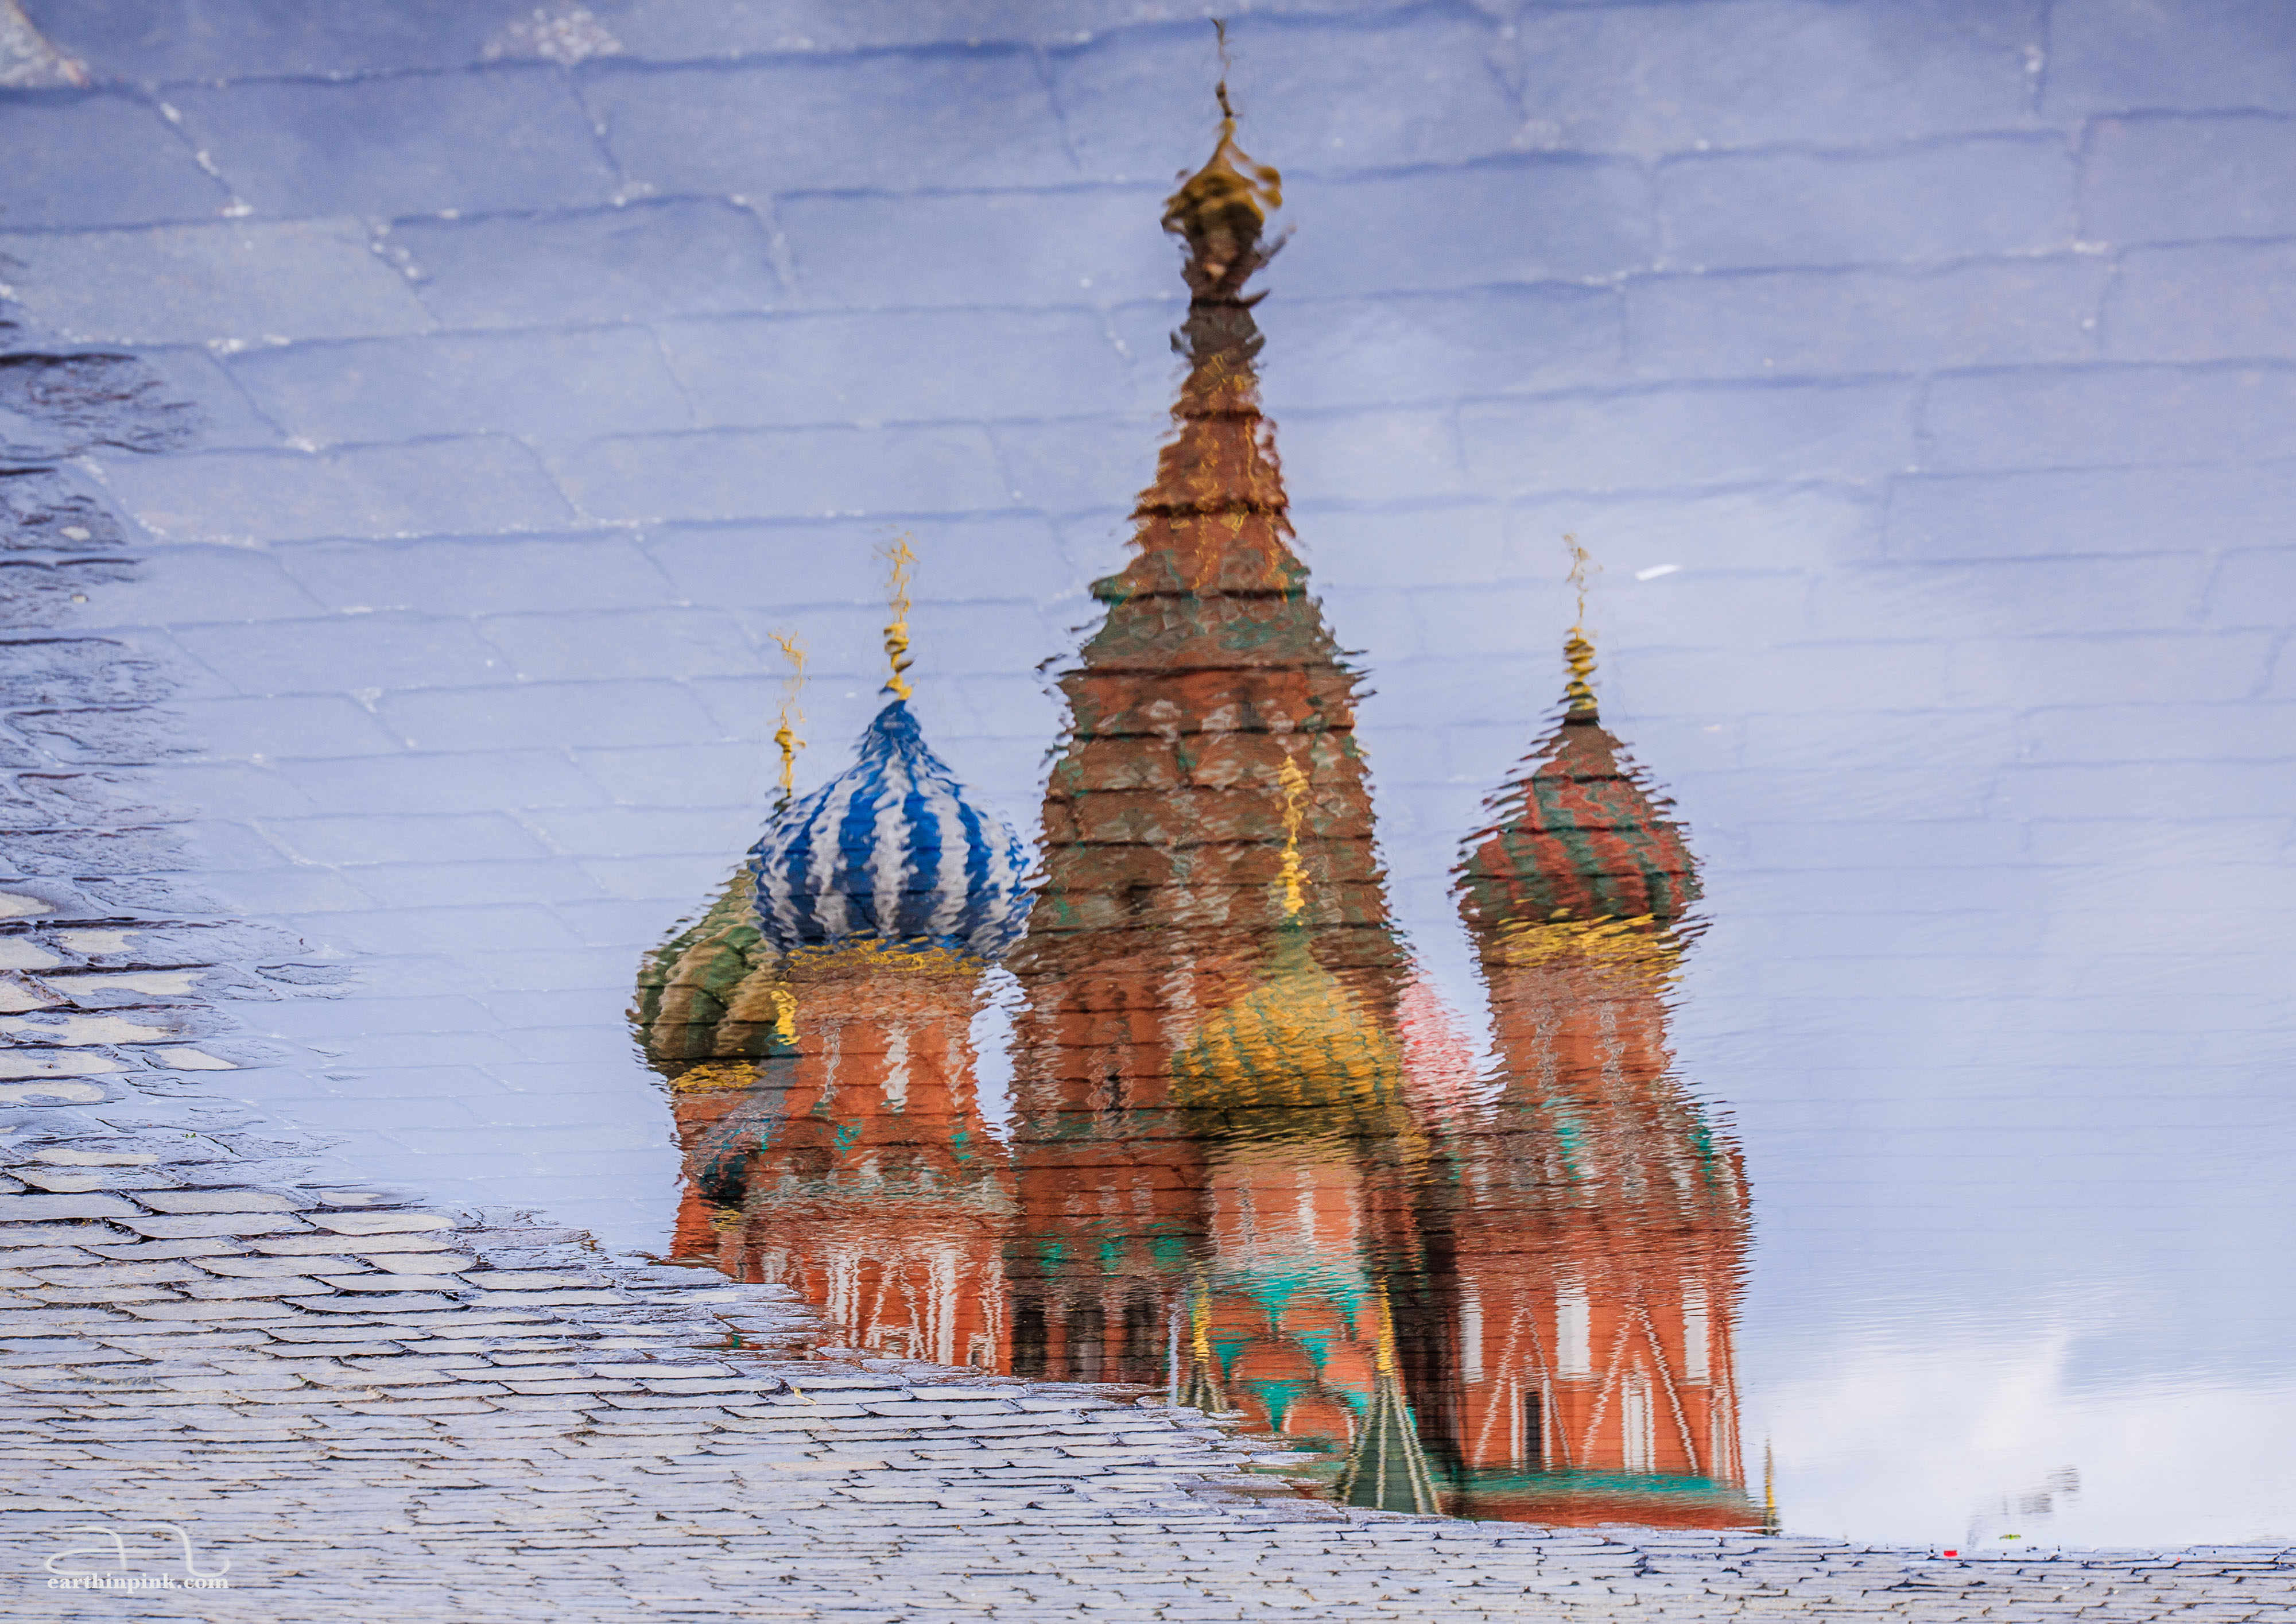 Reflection of St. Basil's Cathedral in Moscow's Red Square